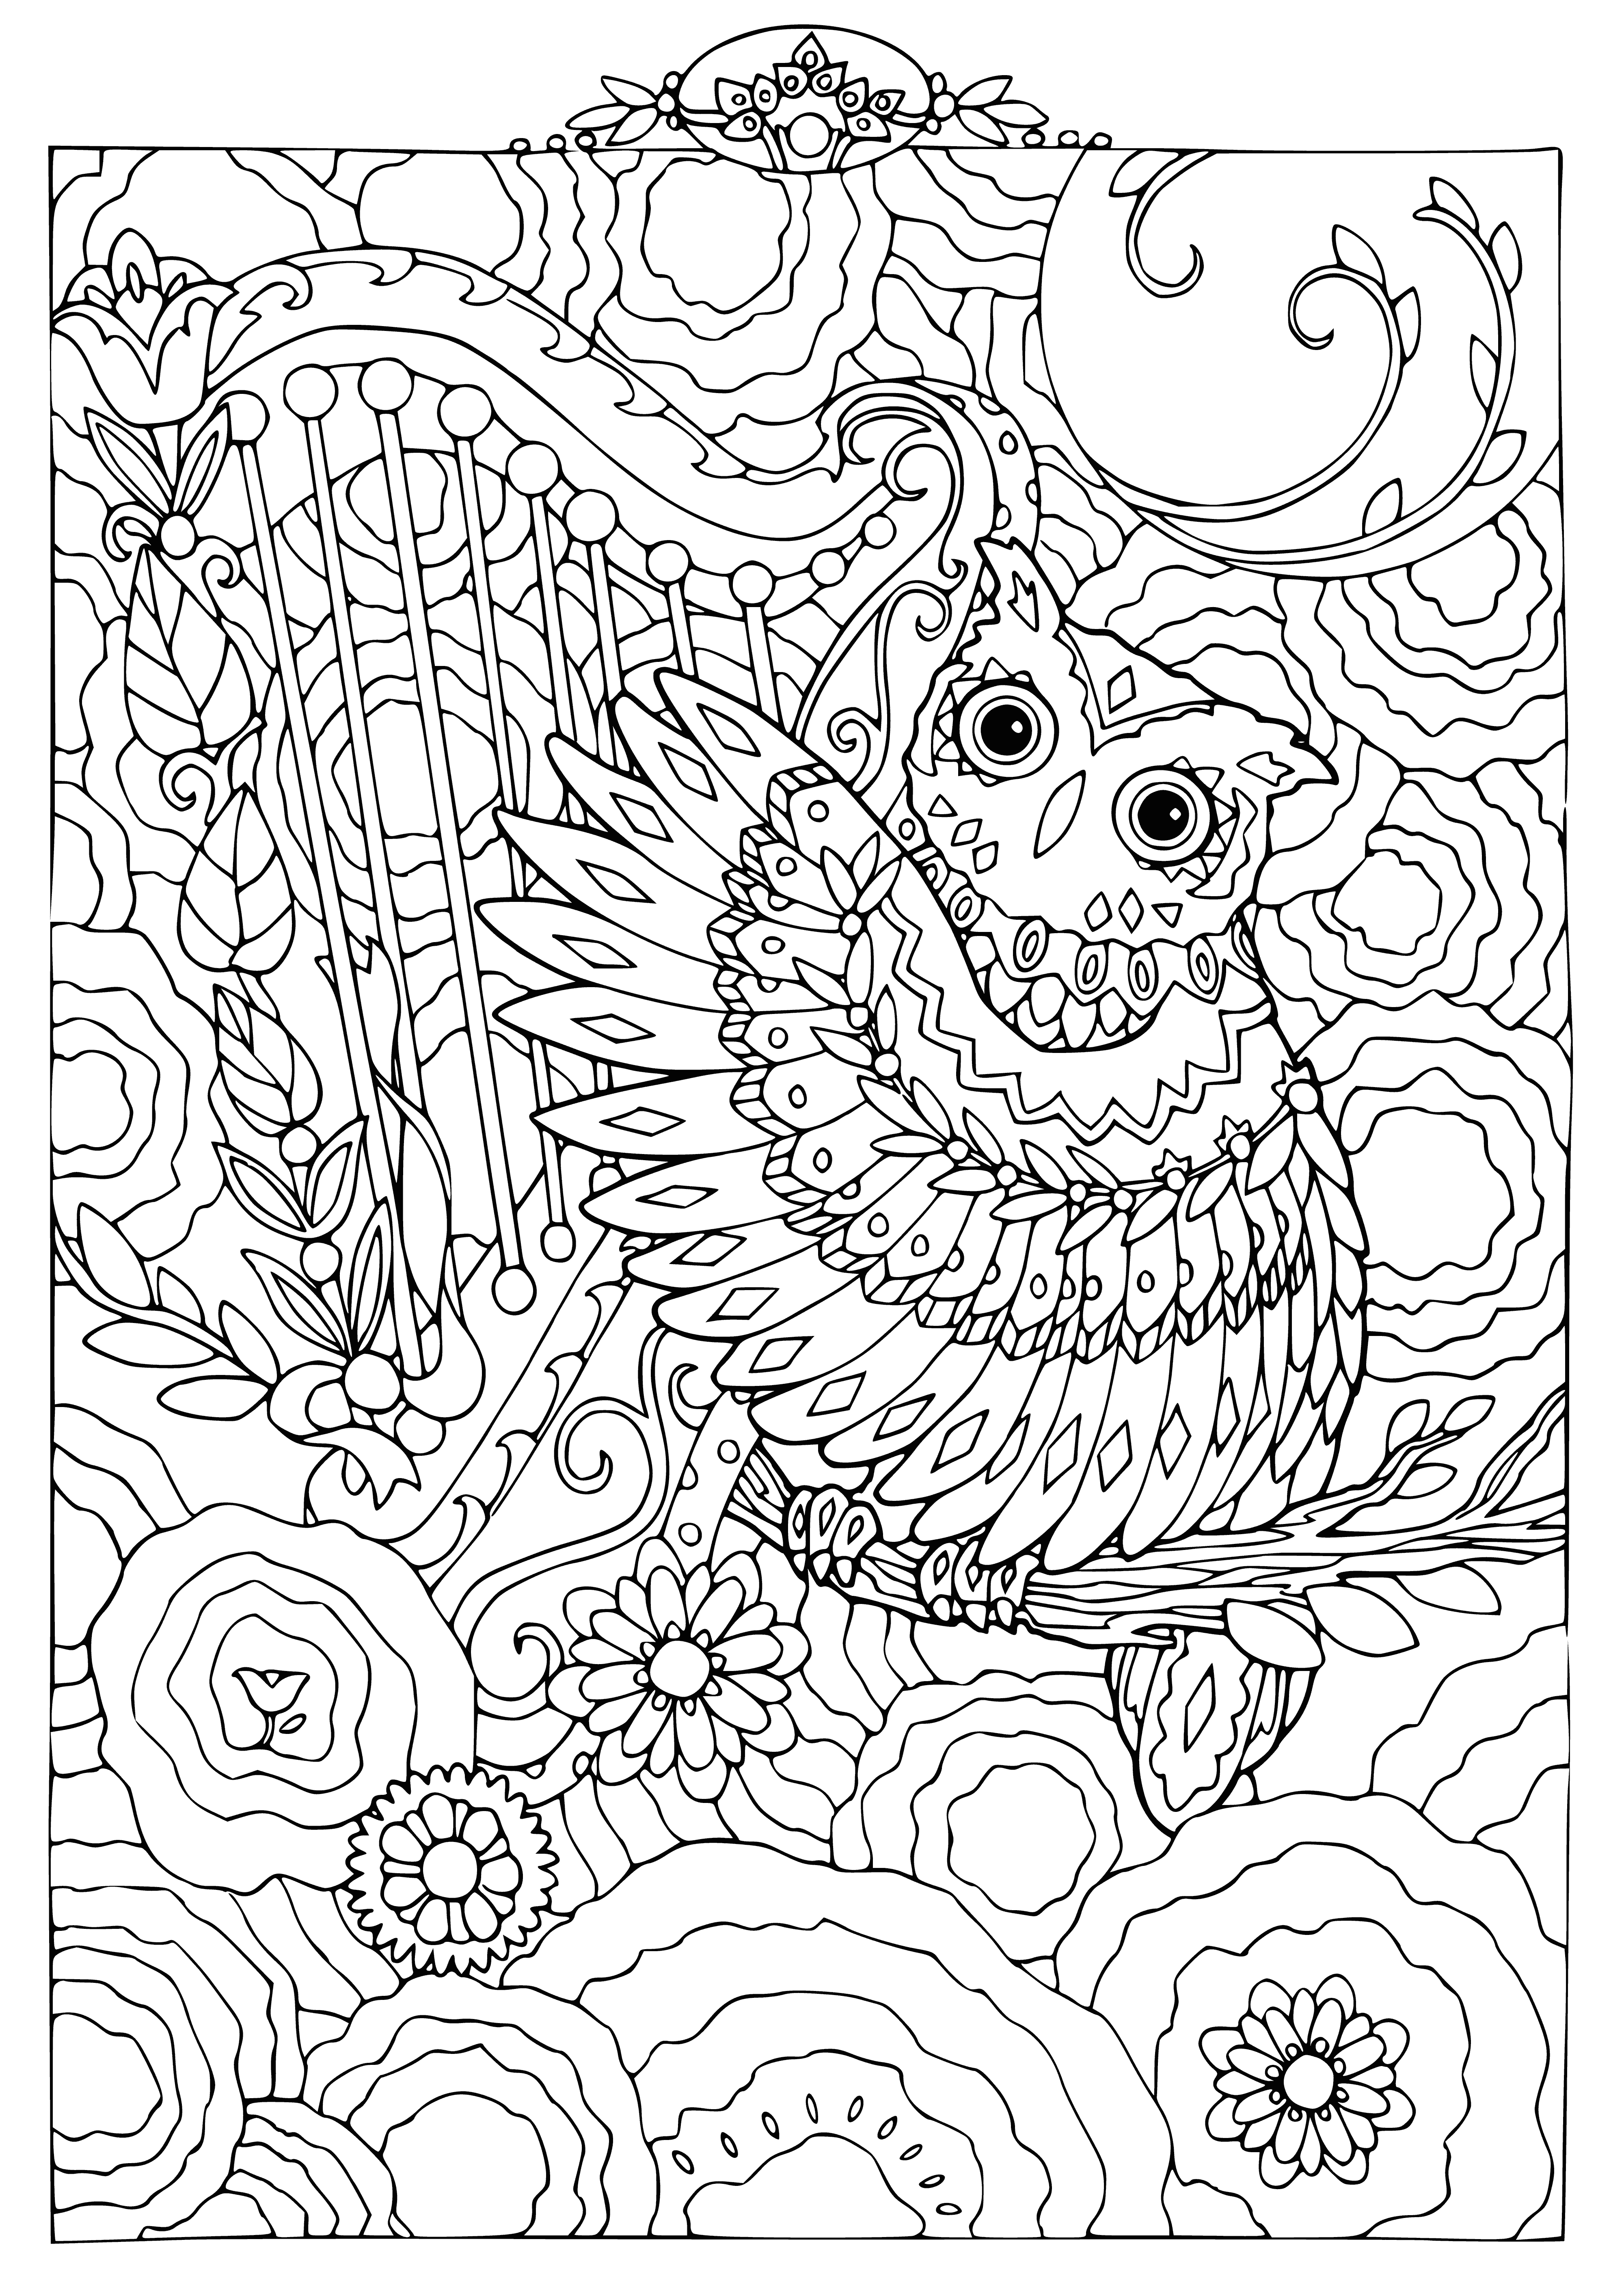 coloring page: Two owls looking into the distance, one perched & one in the air, decorated with patterns & designs.